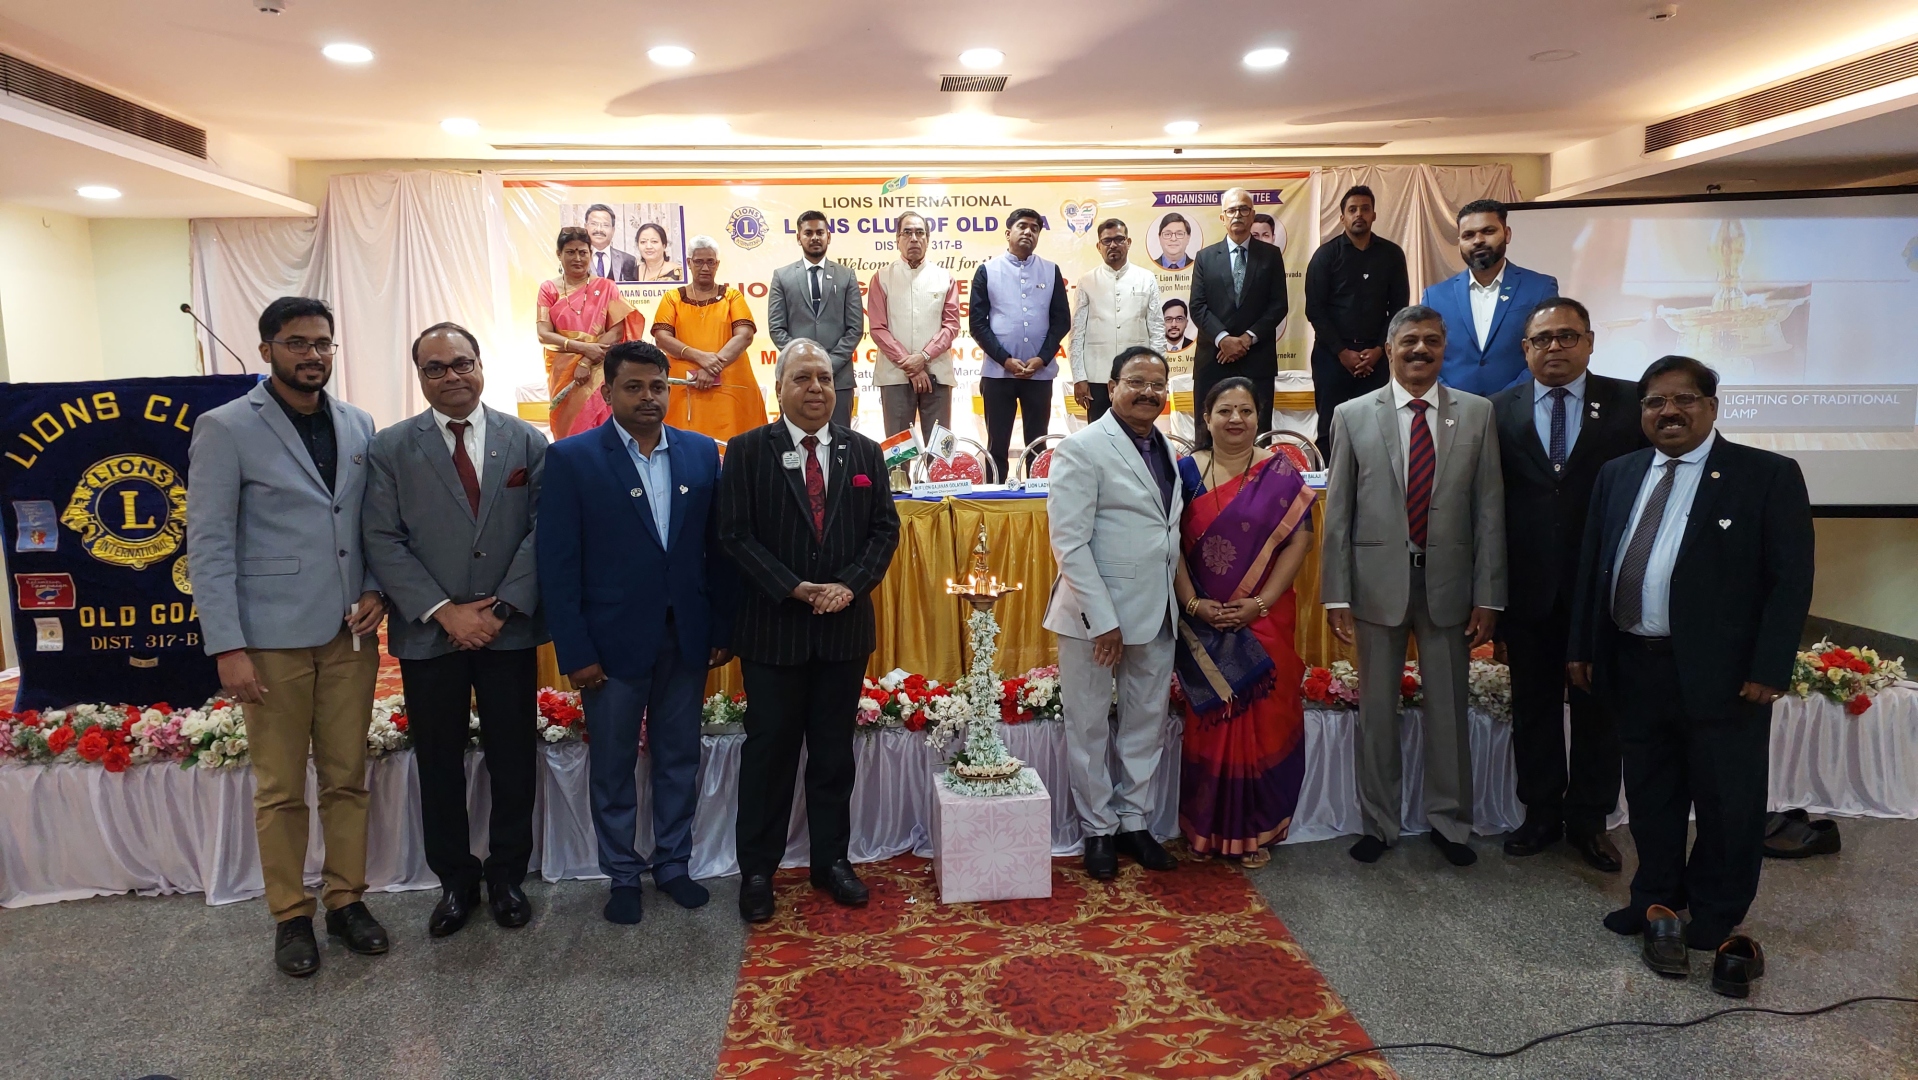 ﻿Lions Club holds Region Meet in Old Goa